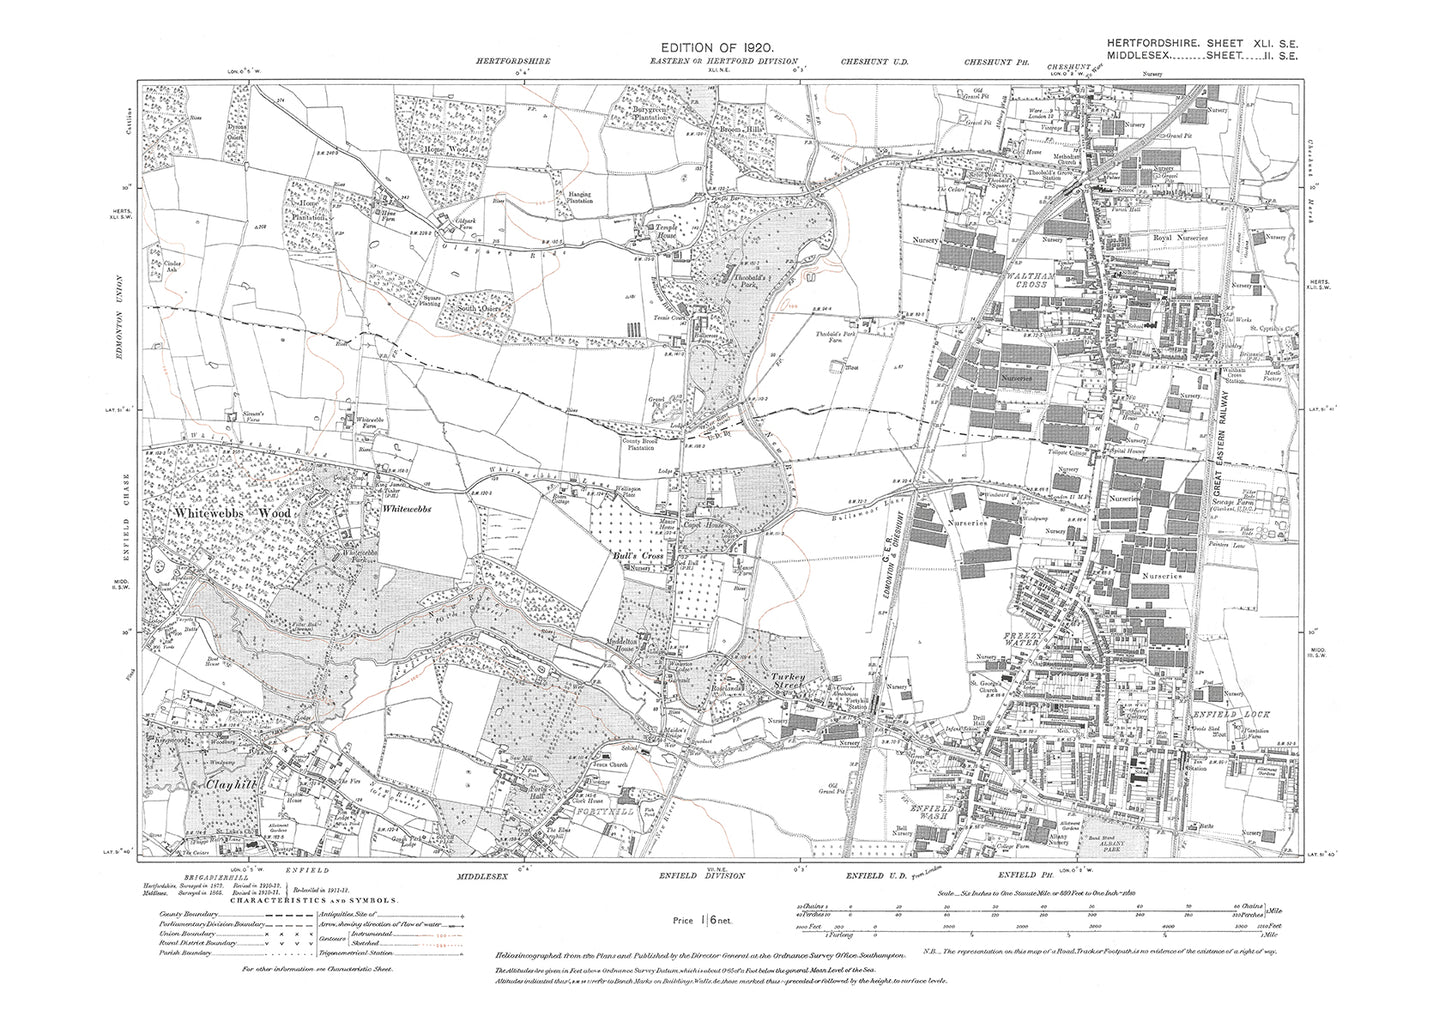 Old OS map dated 1920, showing Waltham Cross in Hertfordshire - 41SE